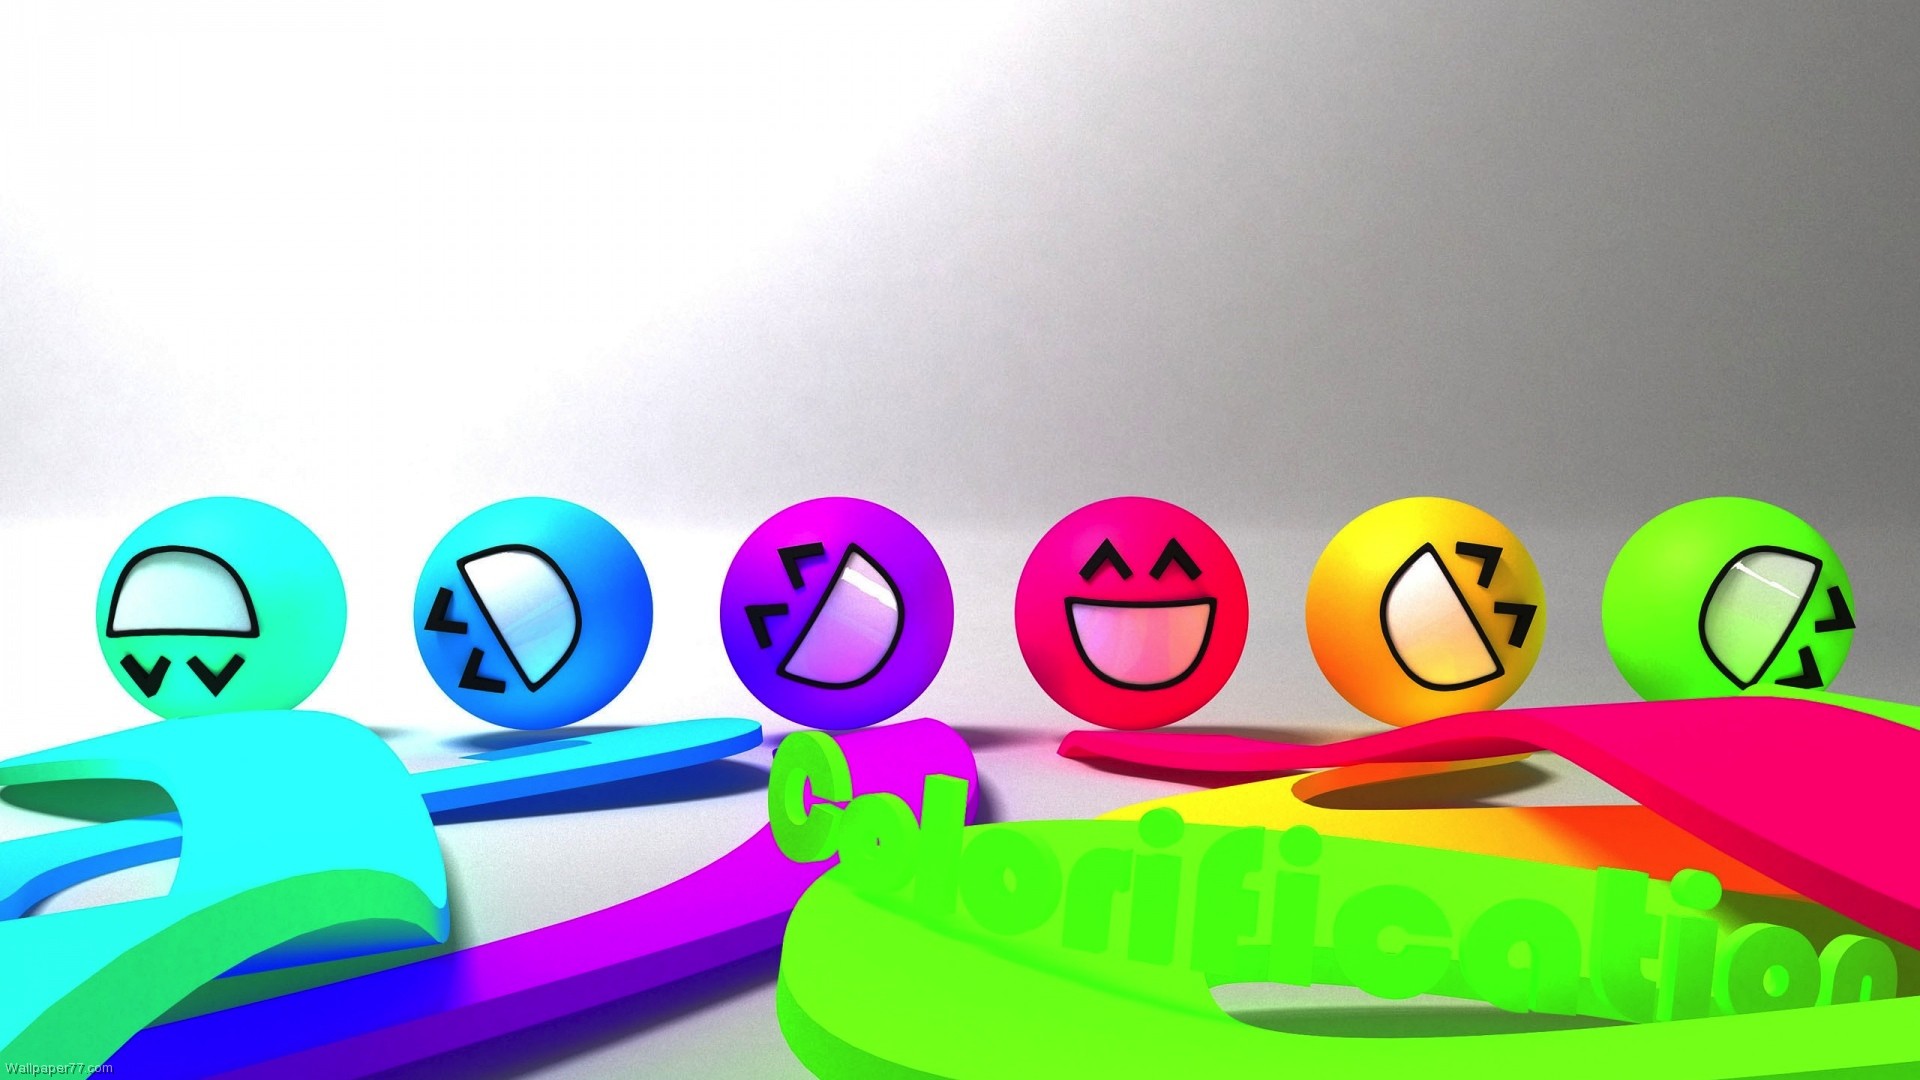 Colorful Smiley Faces fun wallpapers funny wallpapers cute 1920x1080 1920x1080